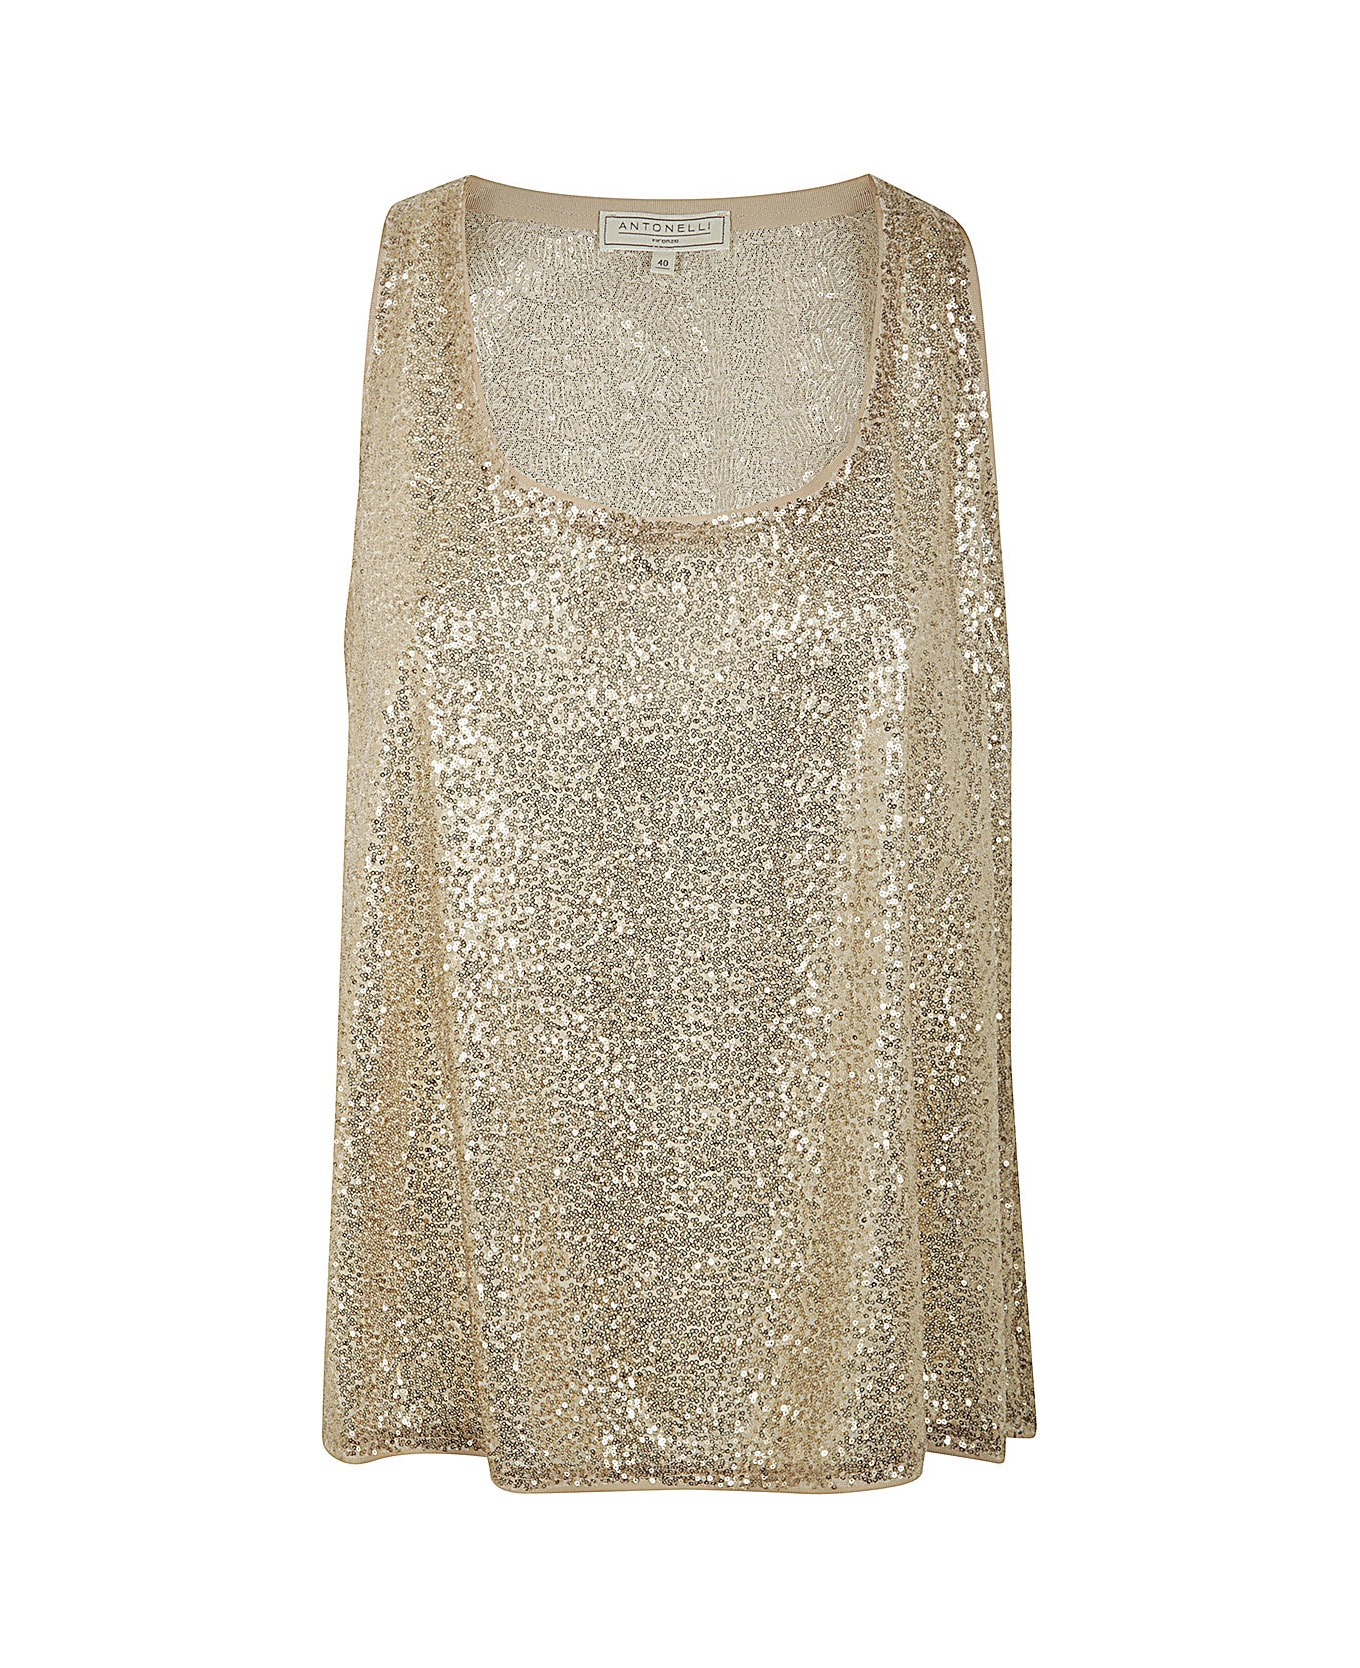 Antonelli Cecil Top With Paillettes - Gold